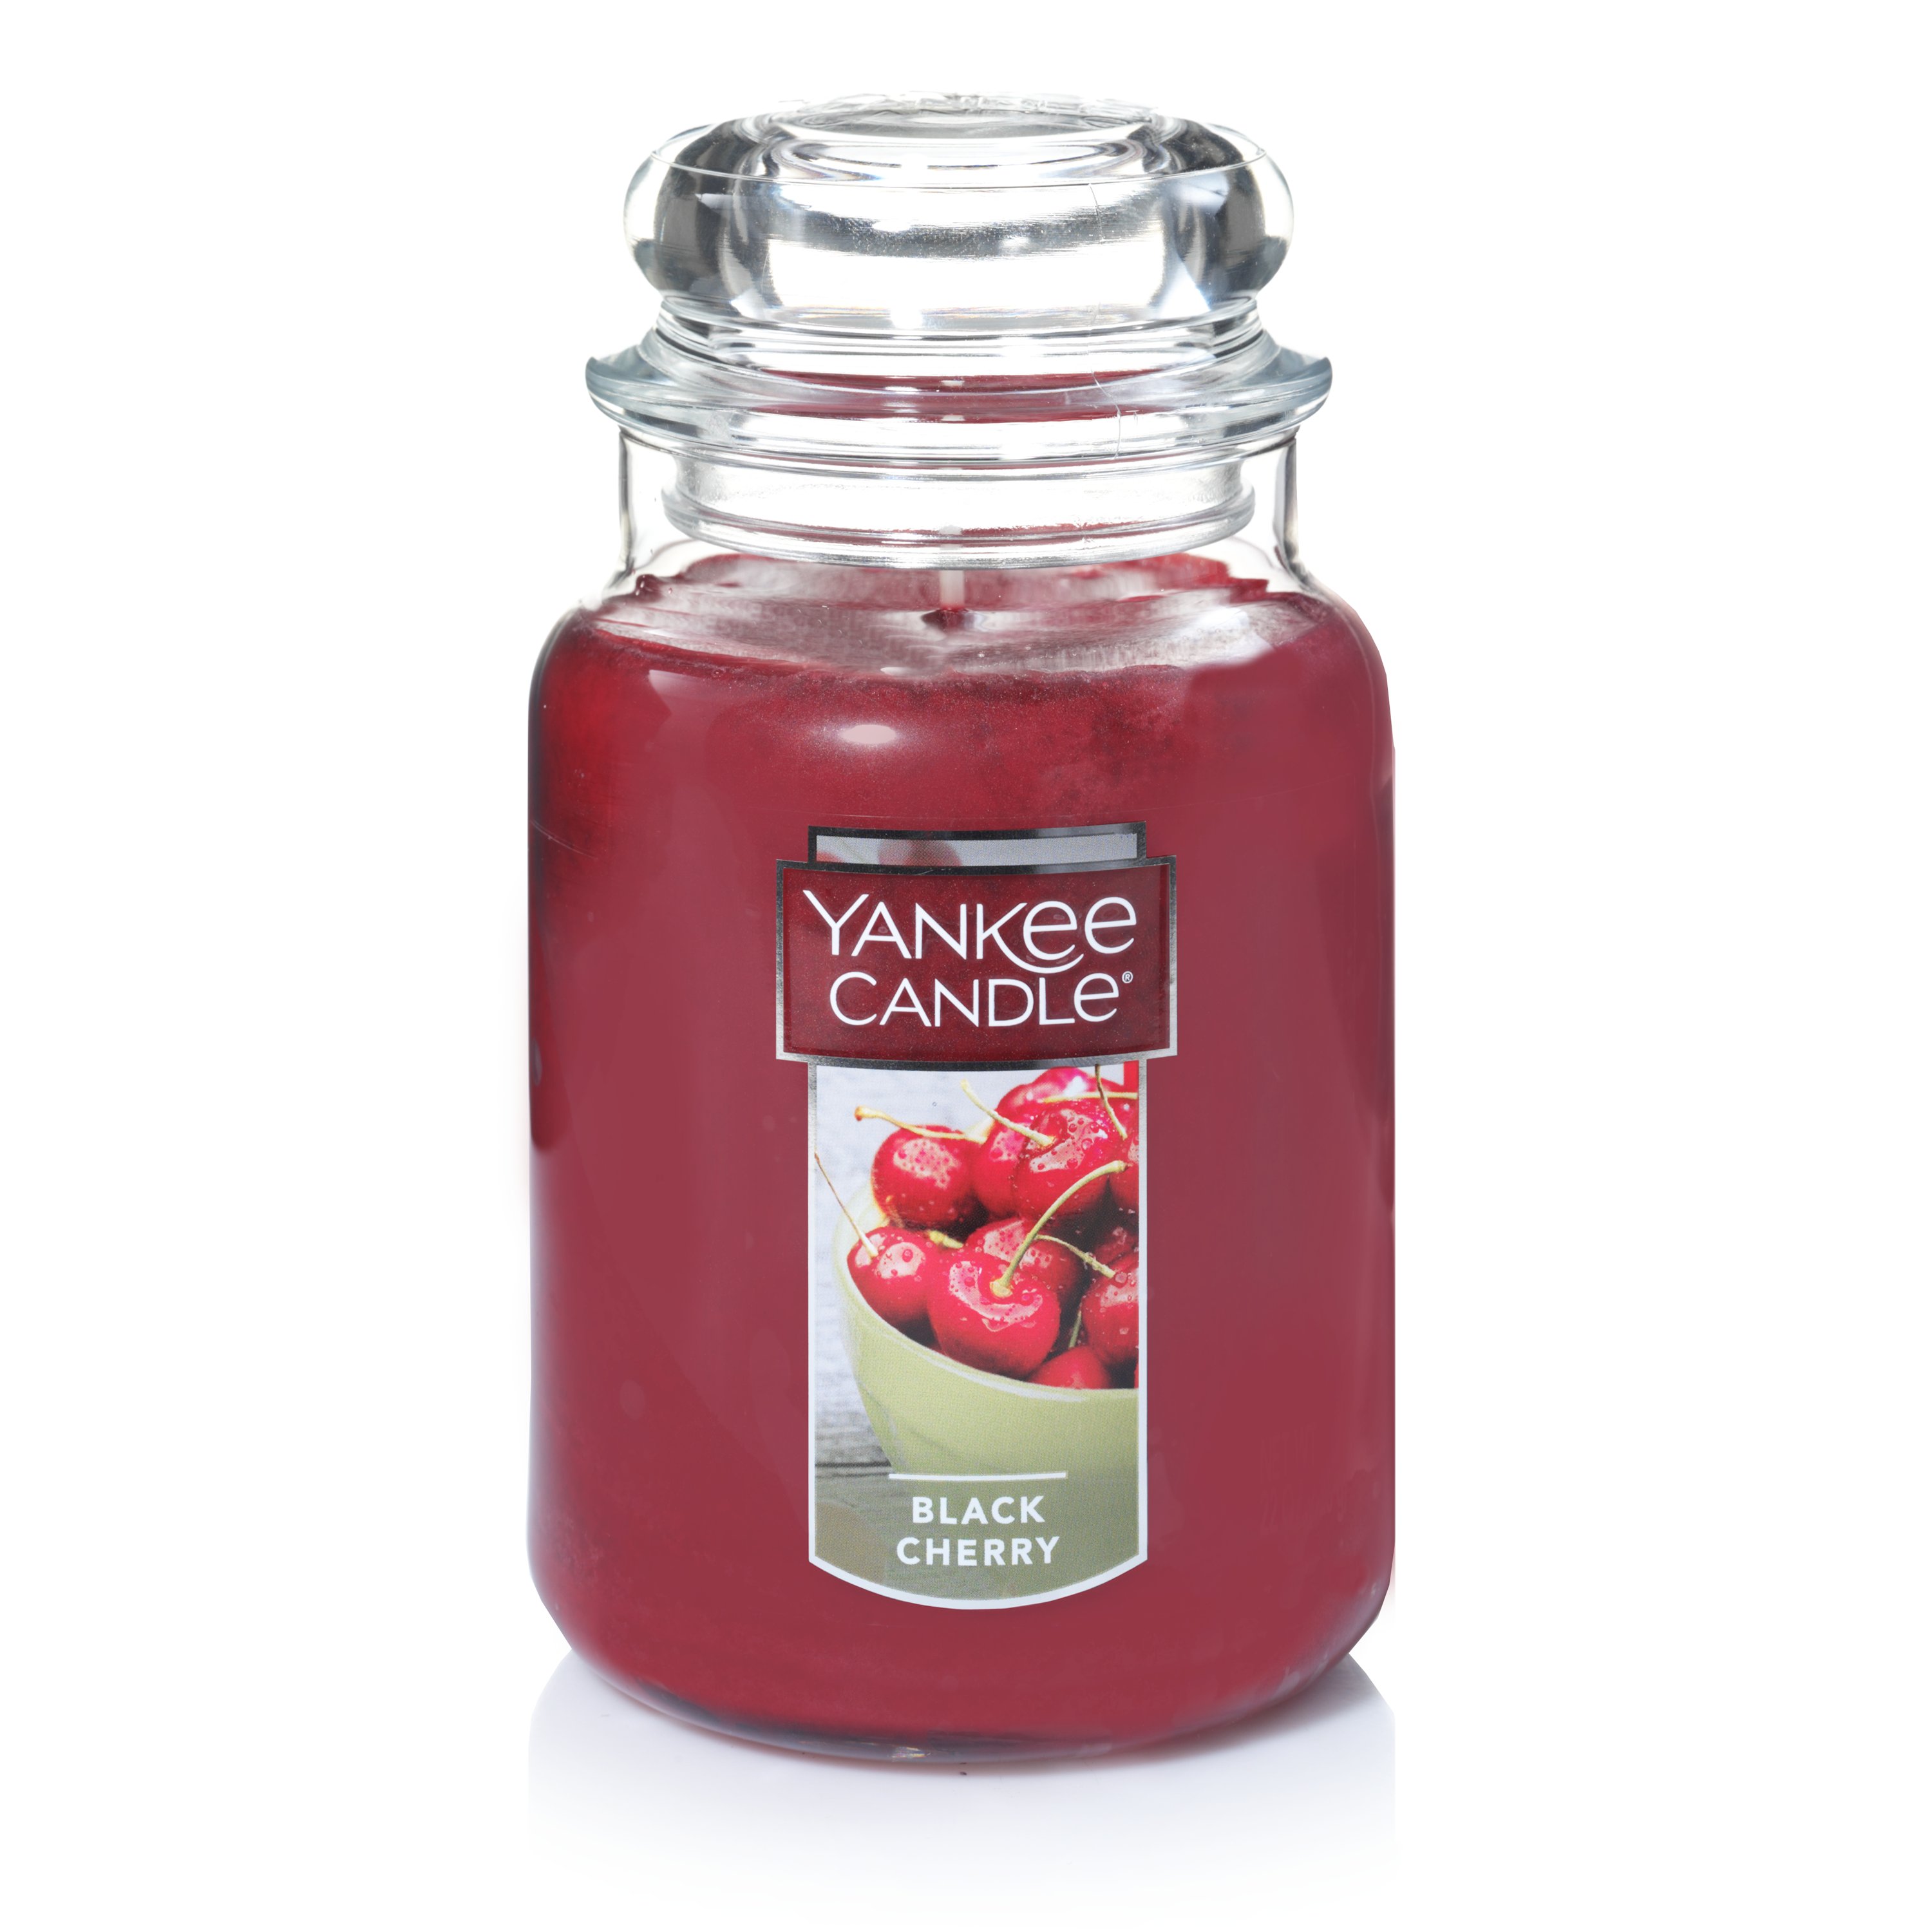 Yankee Candle Gingerbread. Vine Tomato Urban Apothecary. Cherry candle